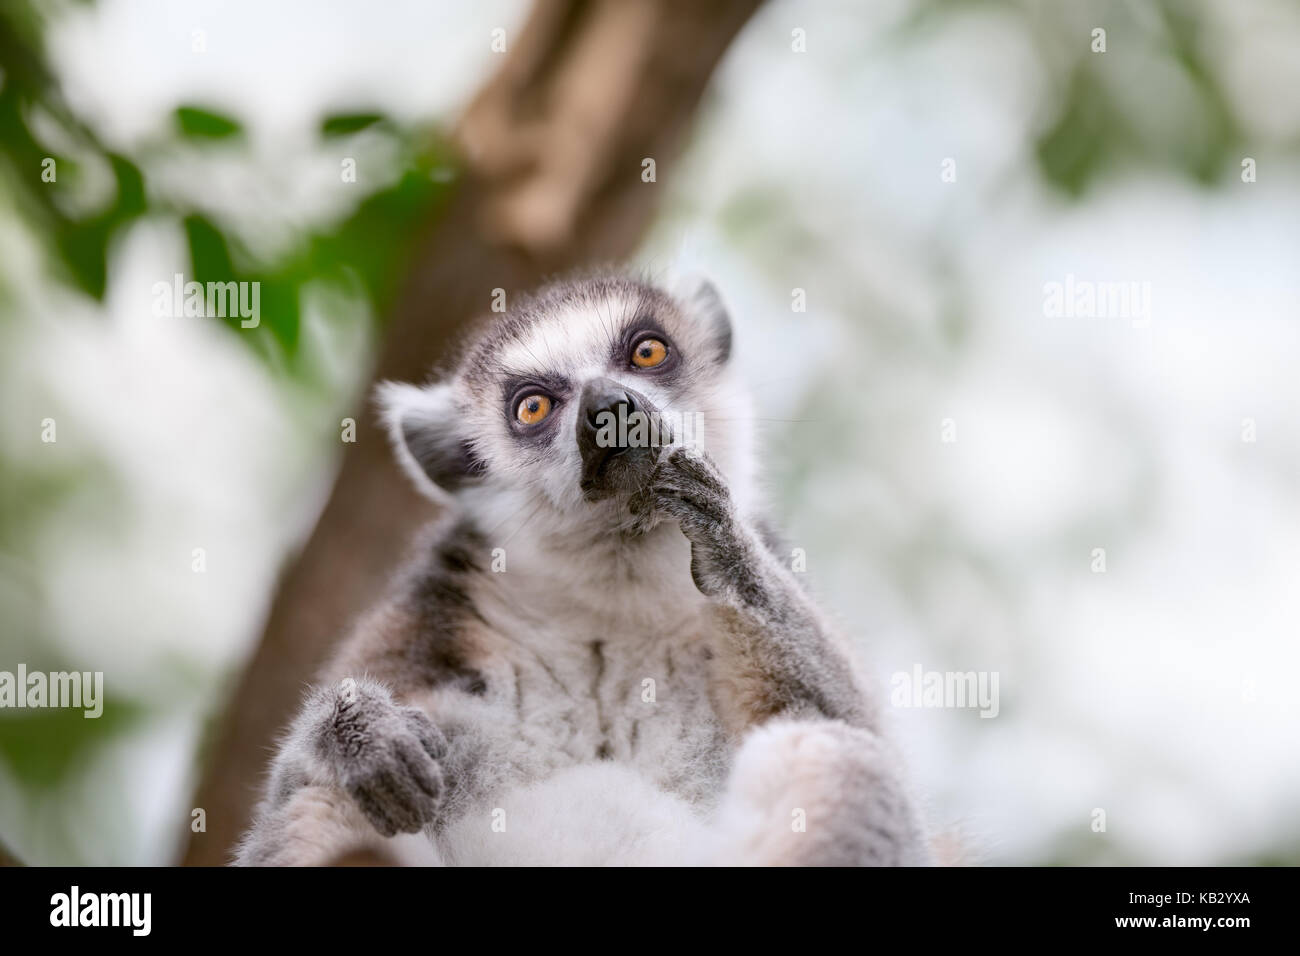 cute ring-tailed lemurin the natural environment Stock Photo